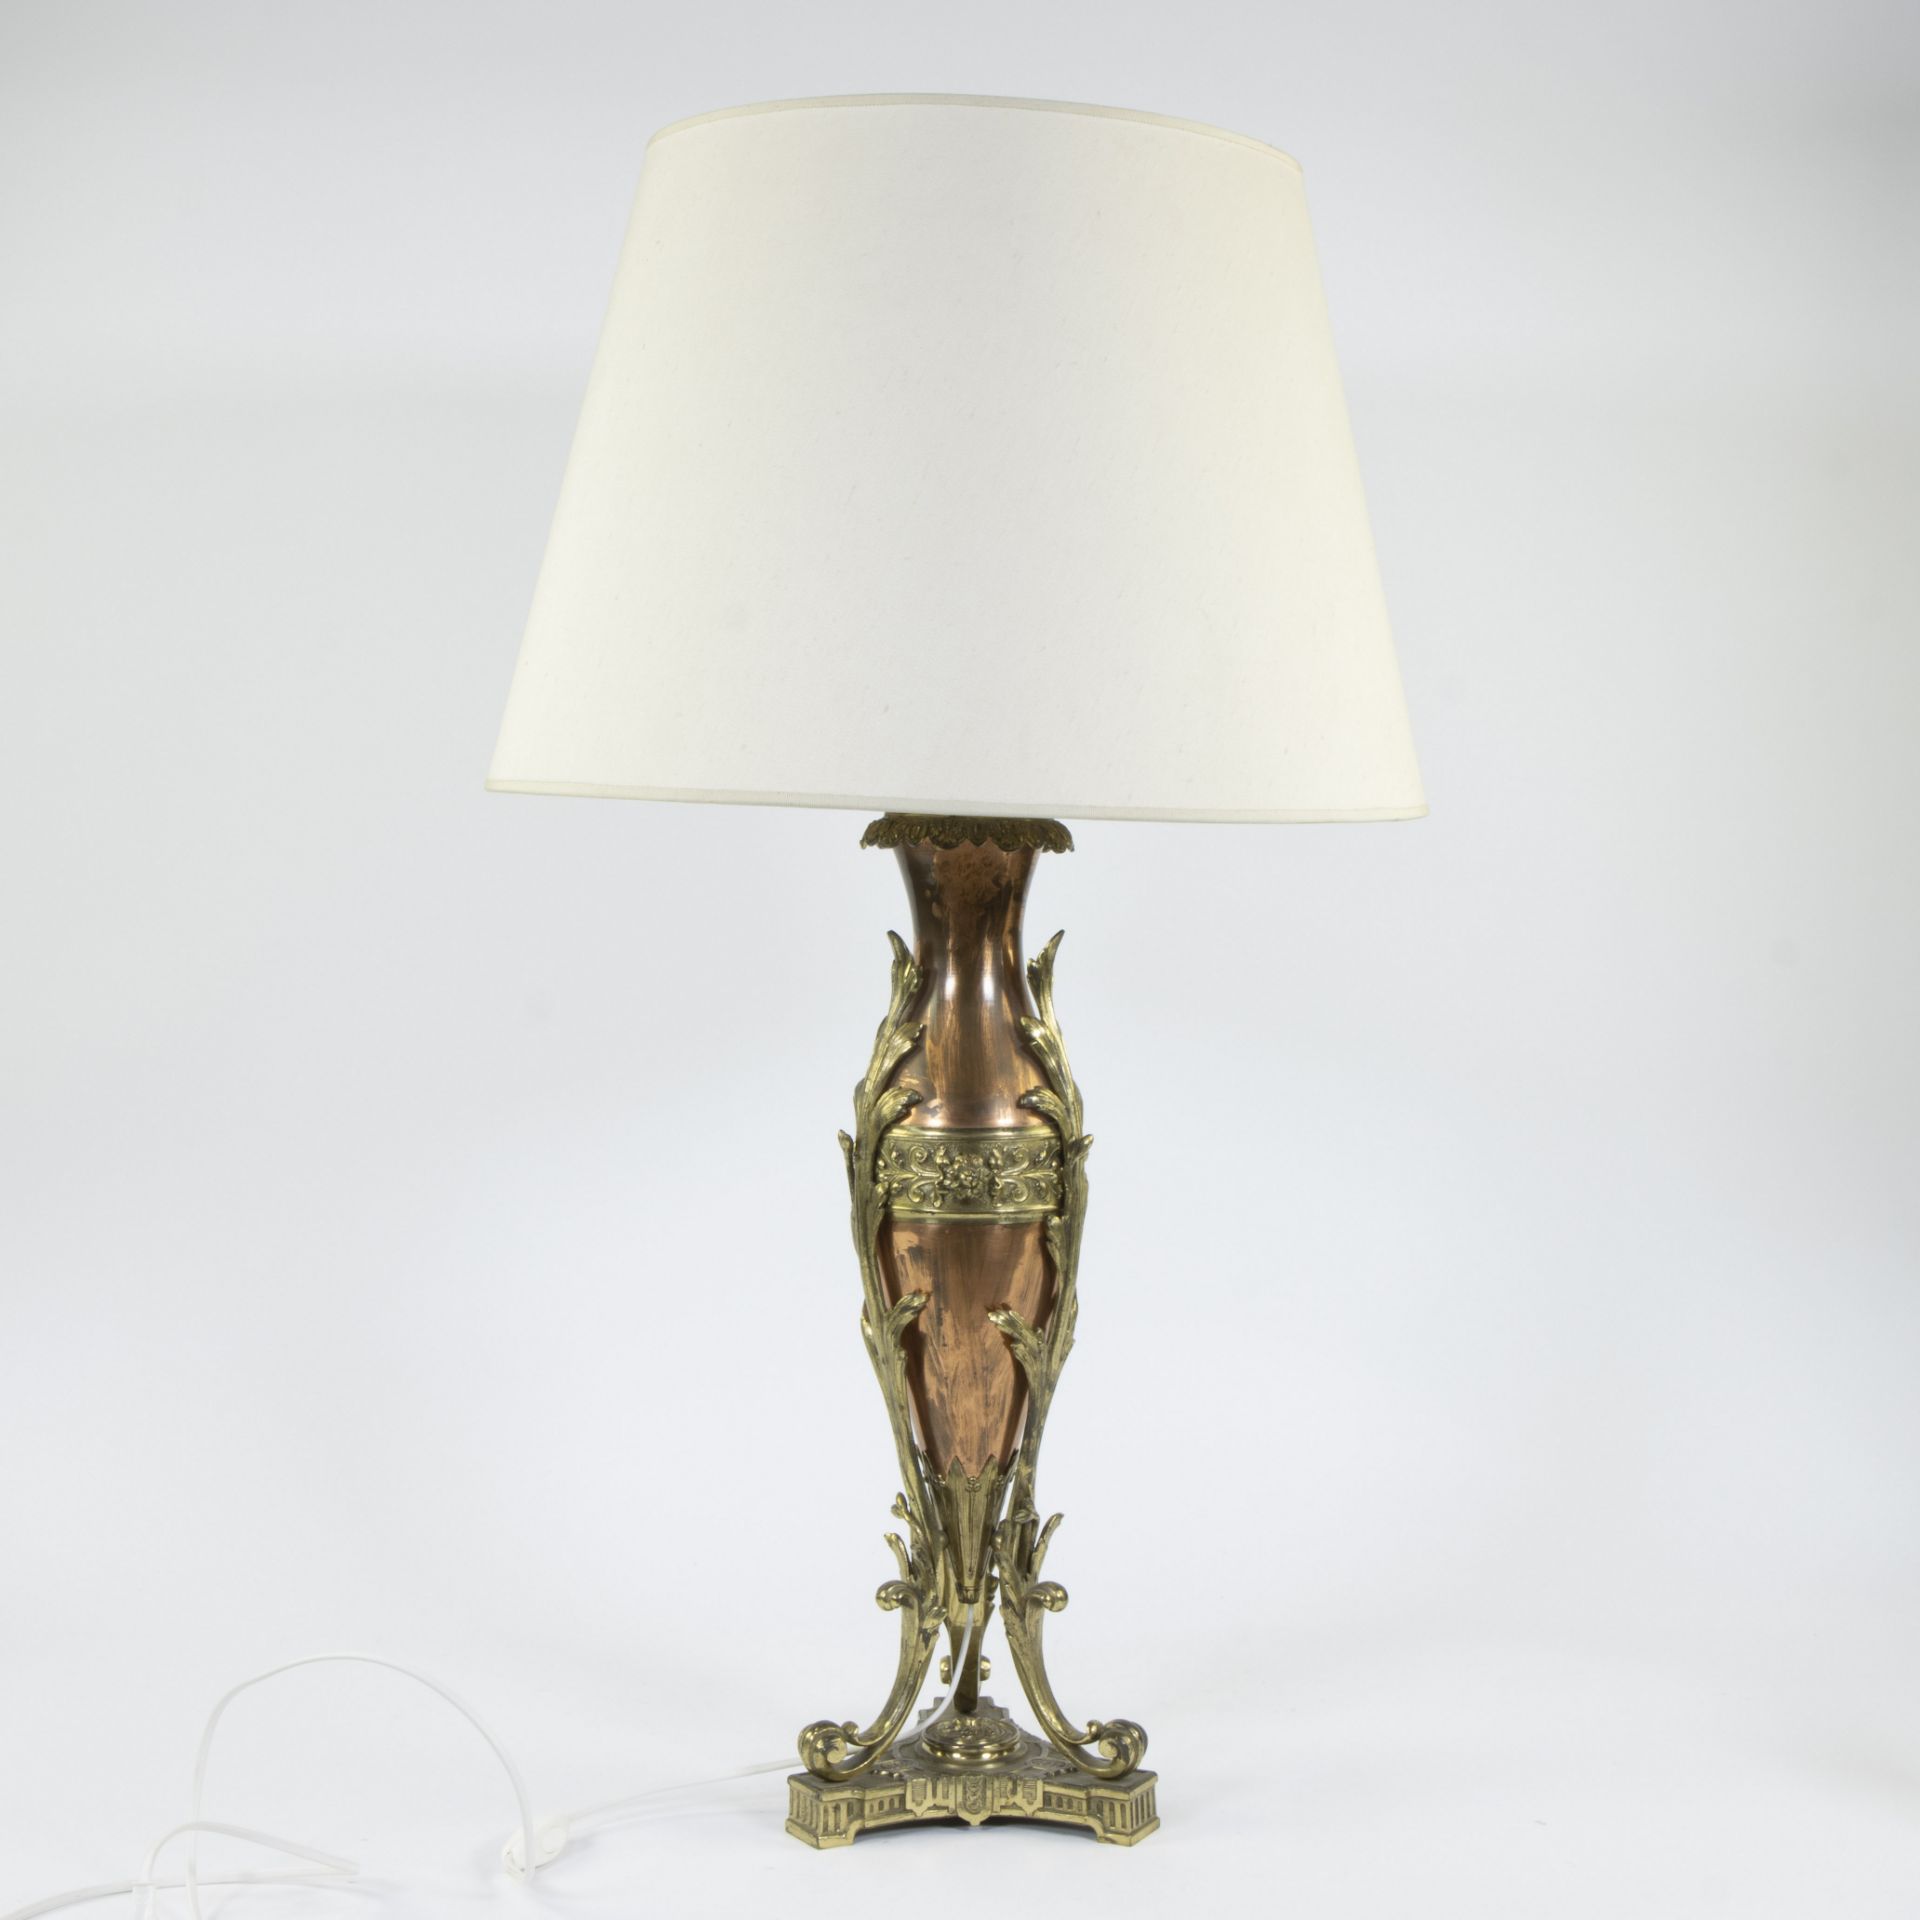 Lampadaire with base in copper and gilt brass, early 20th century - Image 4 of 4